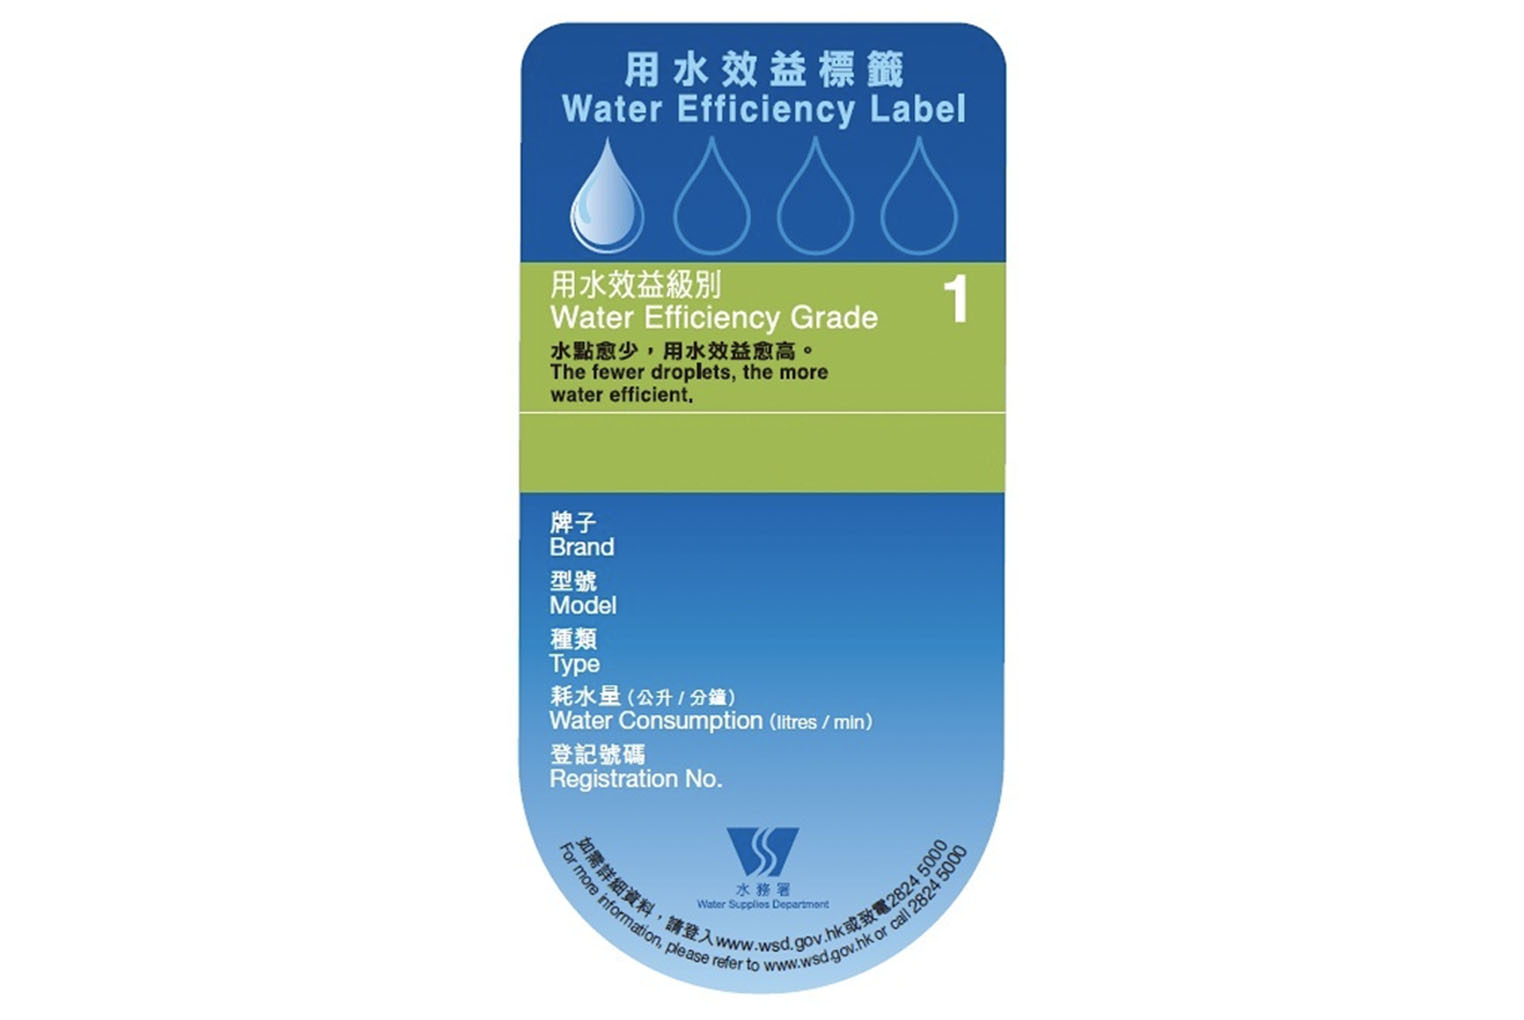 Water-consuming appliances with Grade 1 Water Efficiency Label